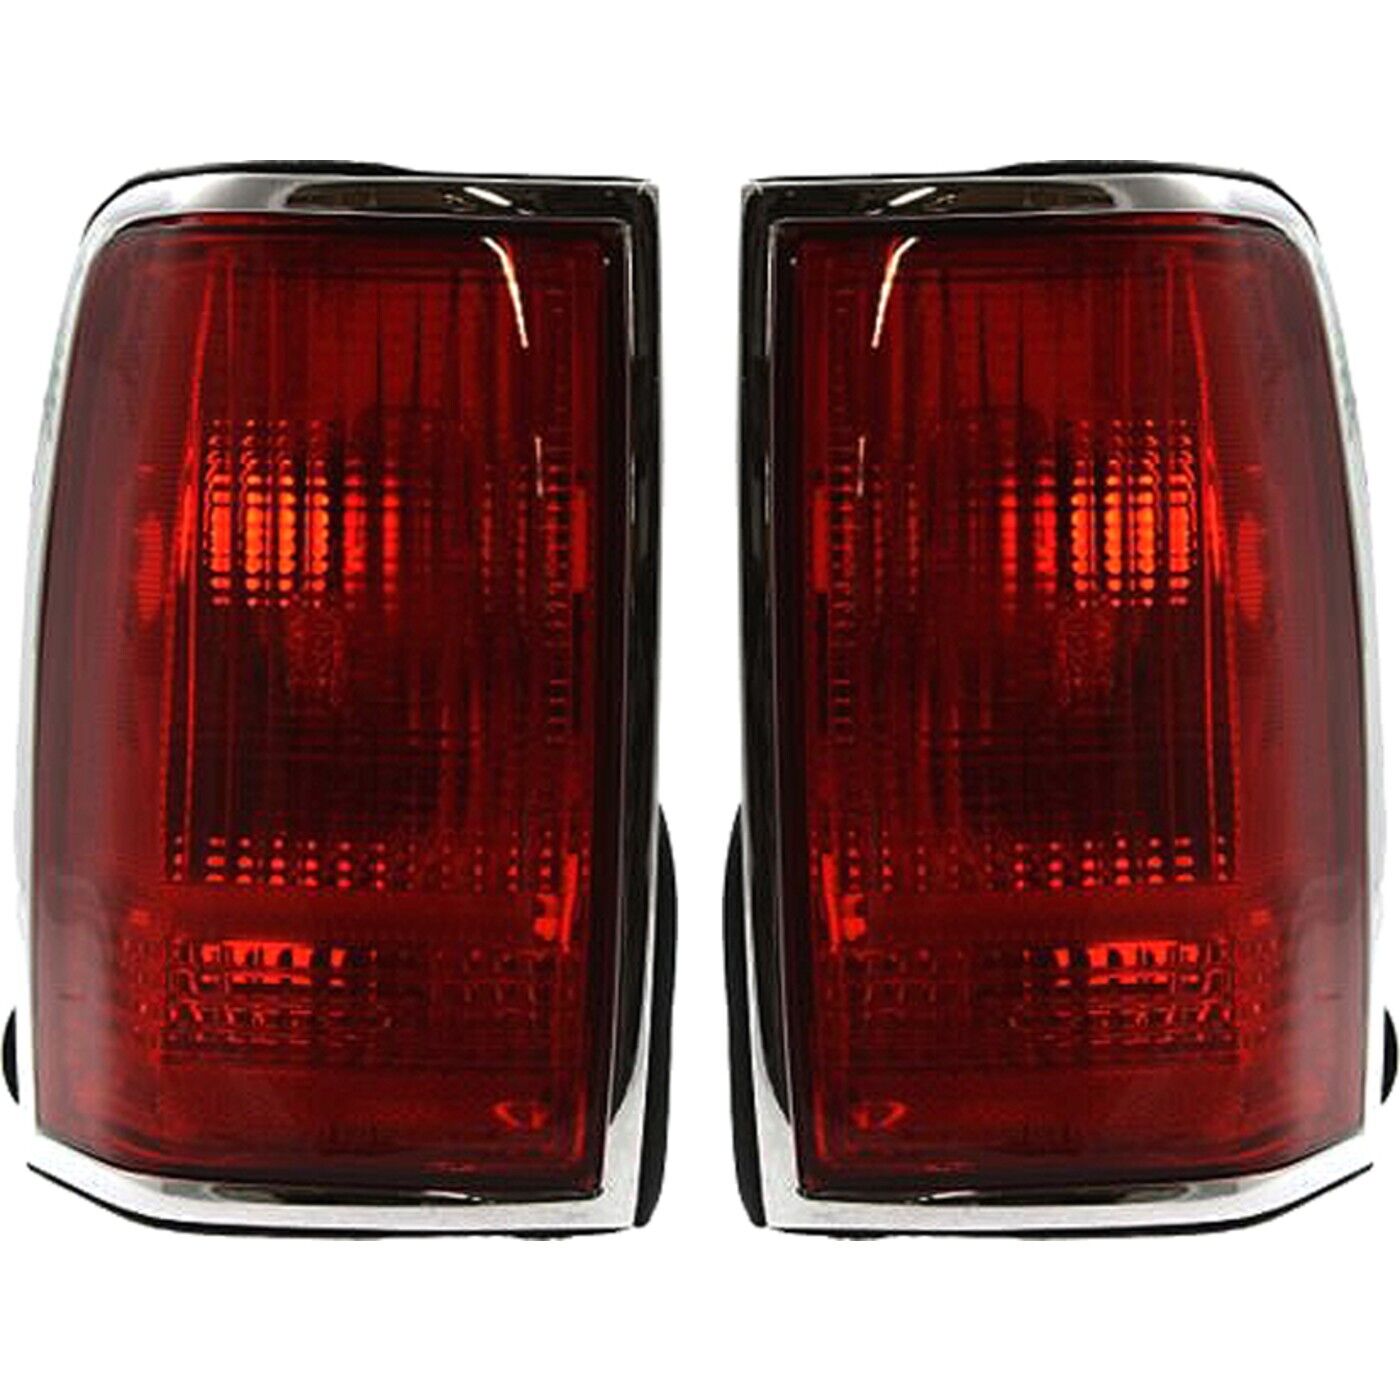 Set of 2 Tail Light For 91-97 Lincoln Town Car LH & RH Red Lens